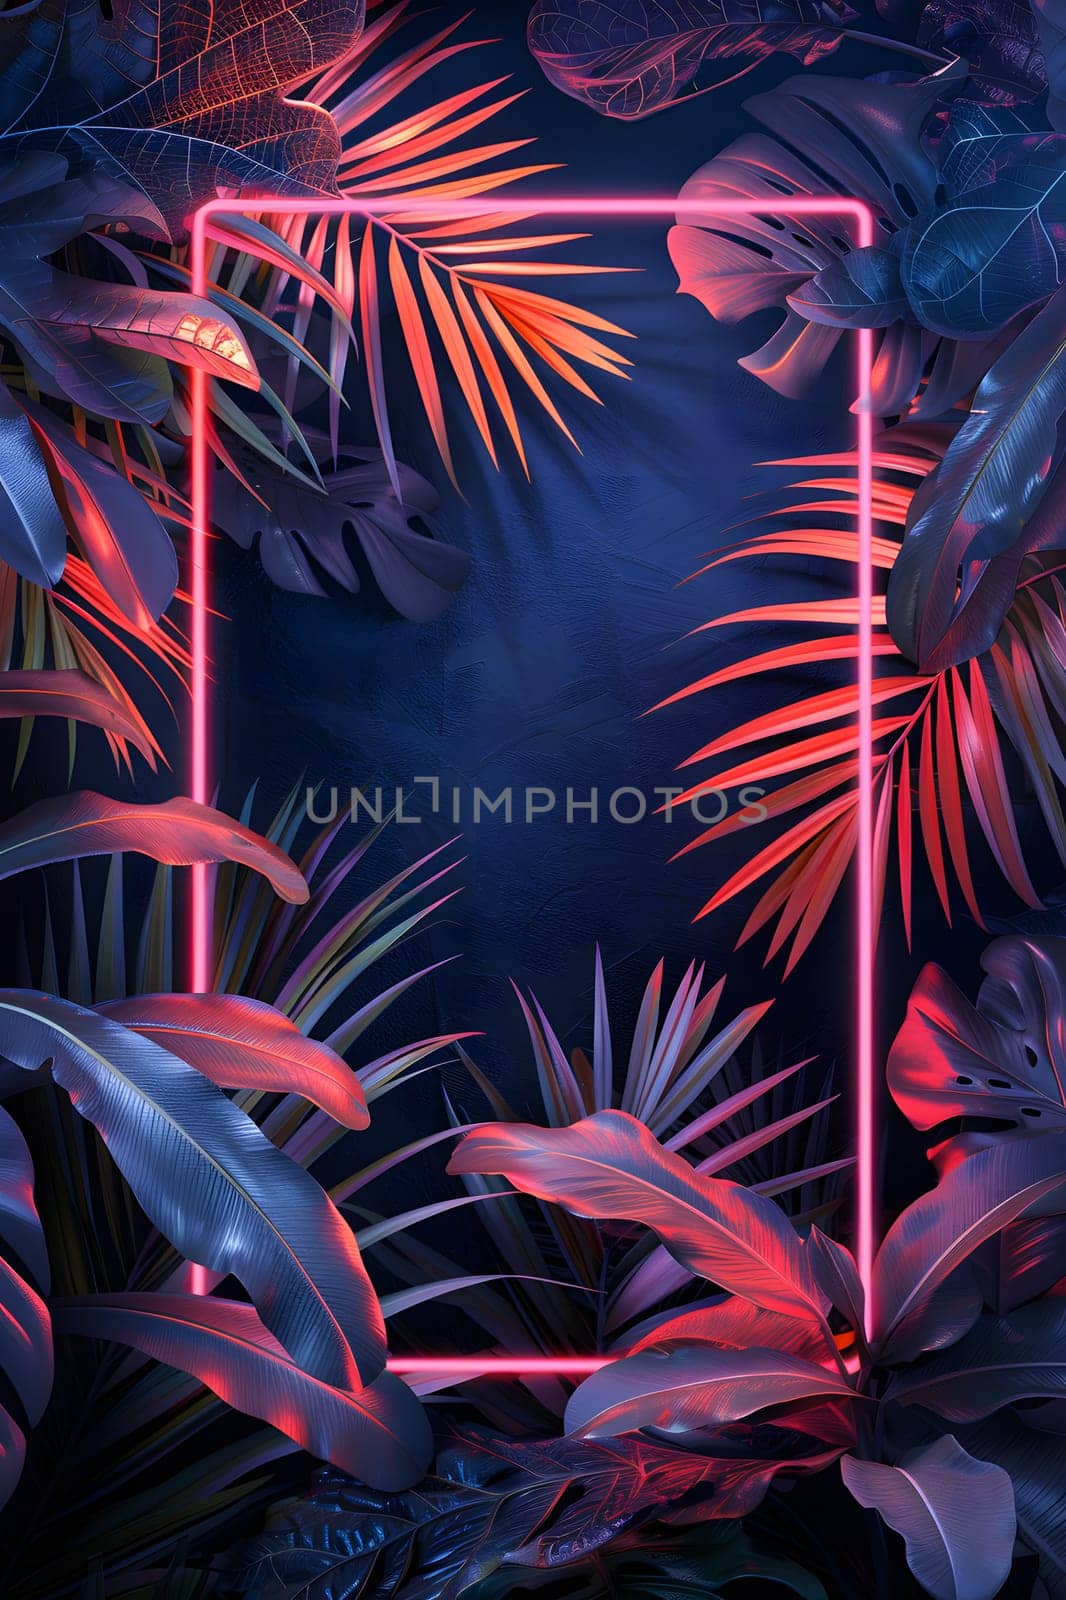 An electric blue neon frame is surrounded by tropical leaves on a dark background, resembling a marine biology scene with underwater organisms and plants